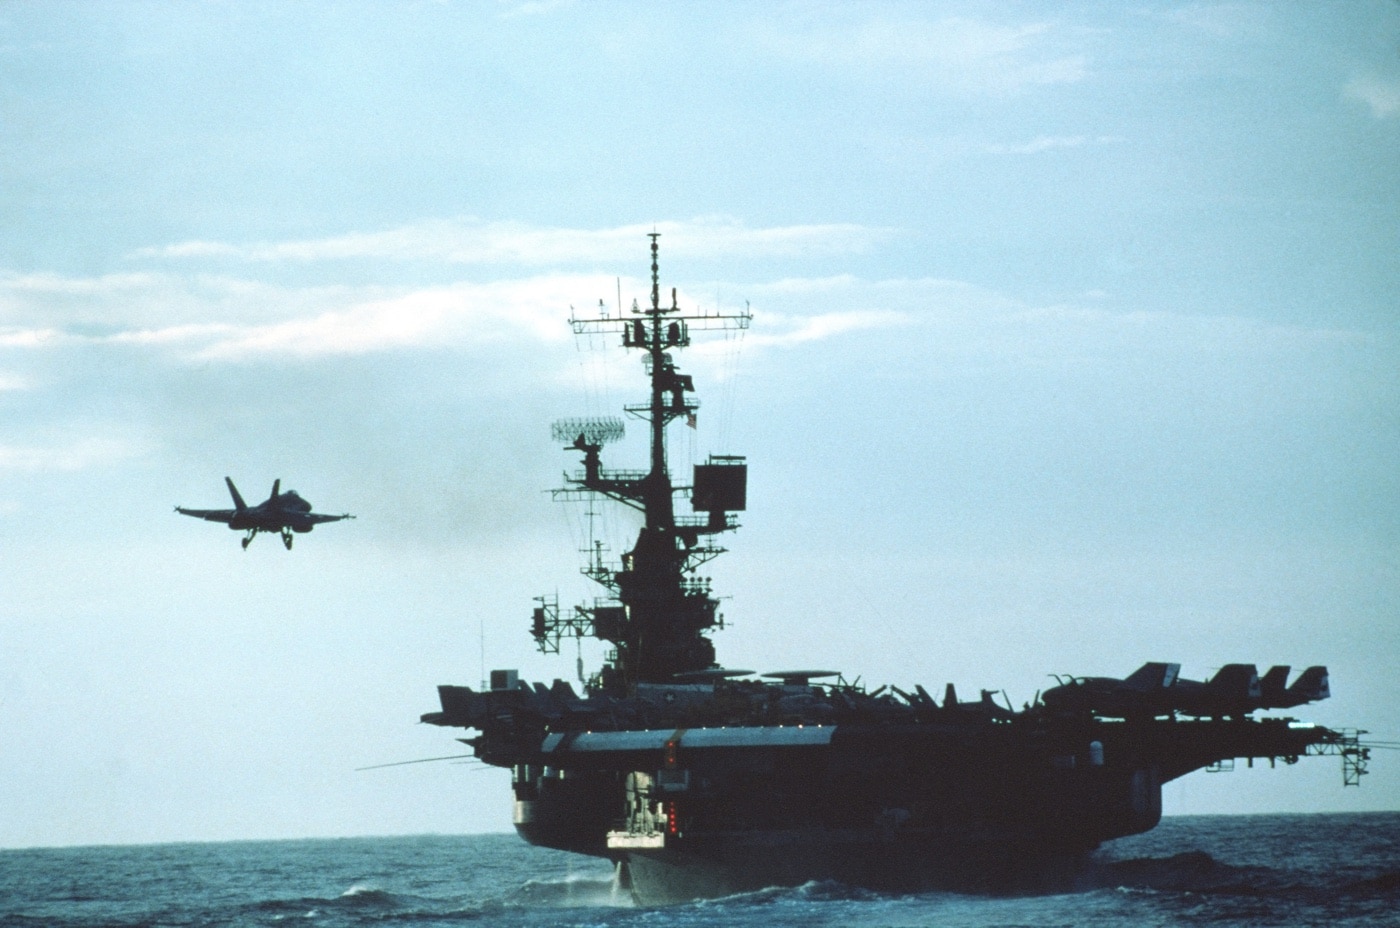 F/A-18 Hornet lands on USS Coral Sea in 1985